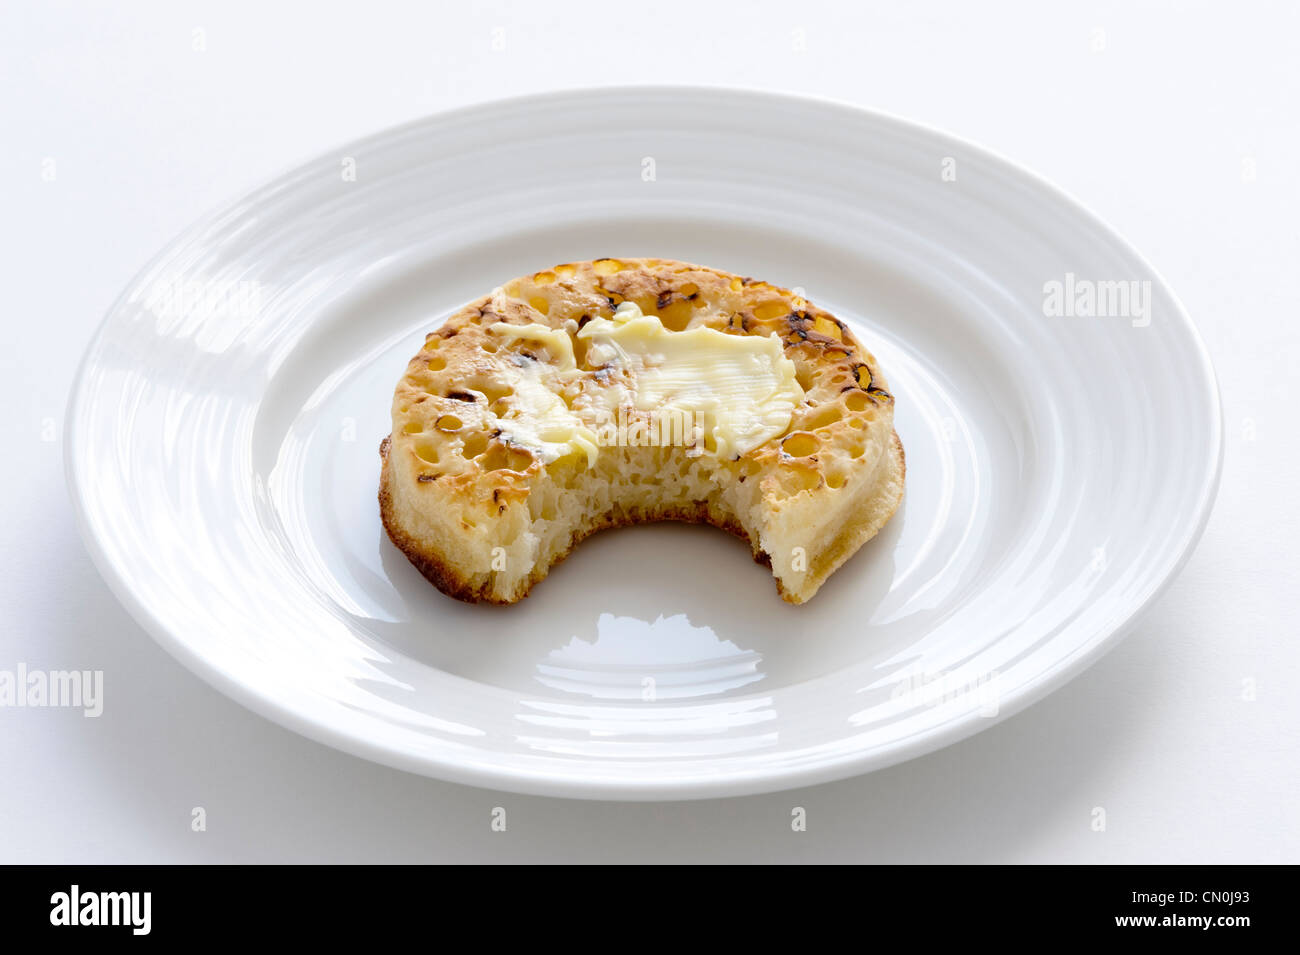 one crumpet on a plate with a bite taken Stock Photo